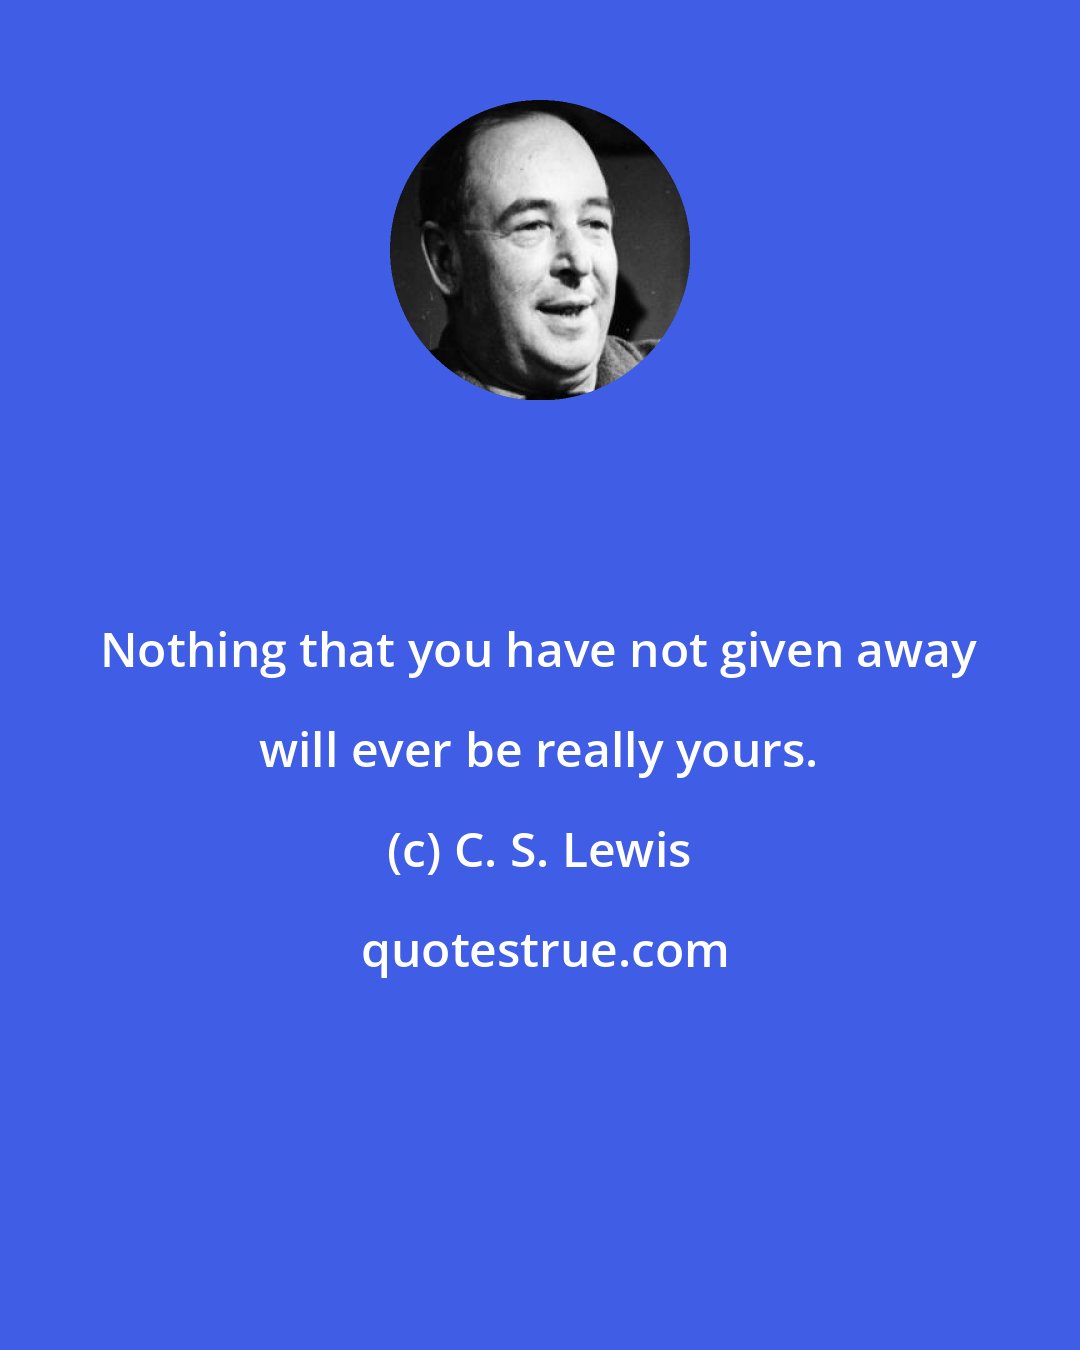 C. S. Lewis: Nothing that you have not given away will ever be really yours.